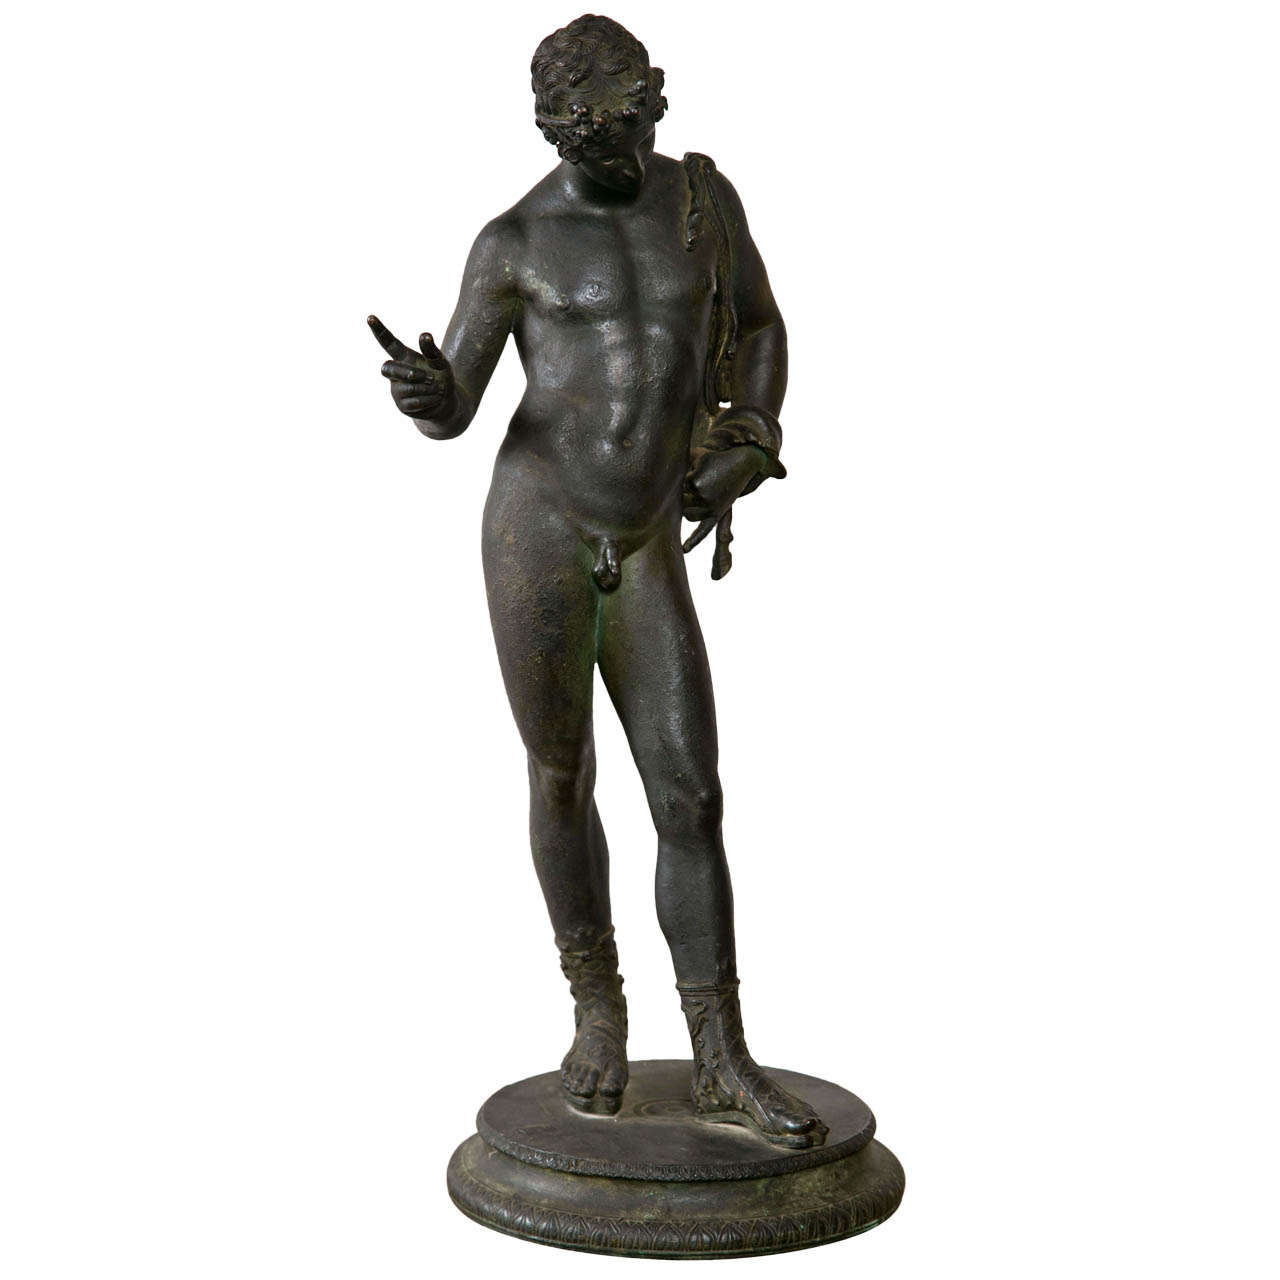 Standing Bronze Figure of Antinous, after the Antique